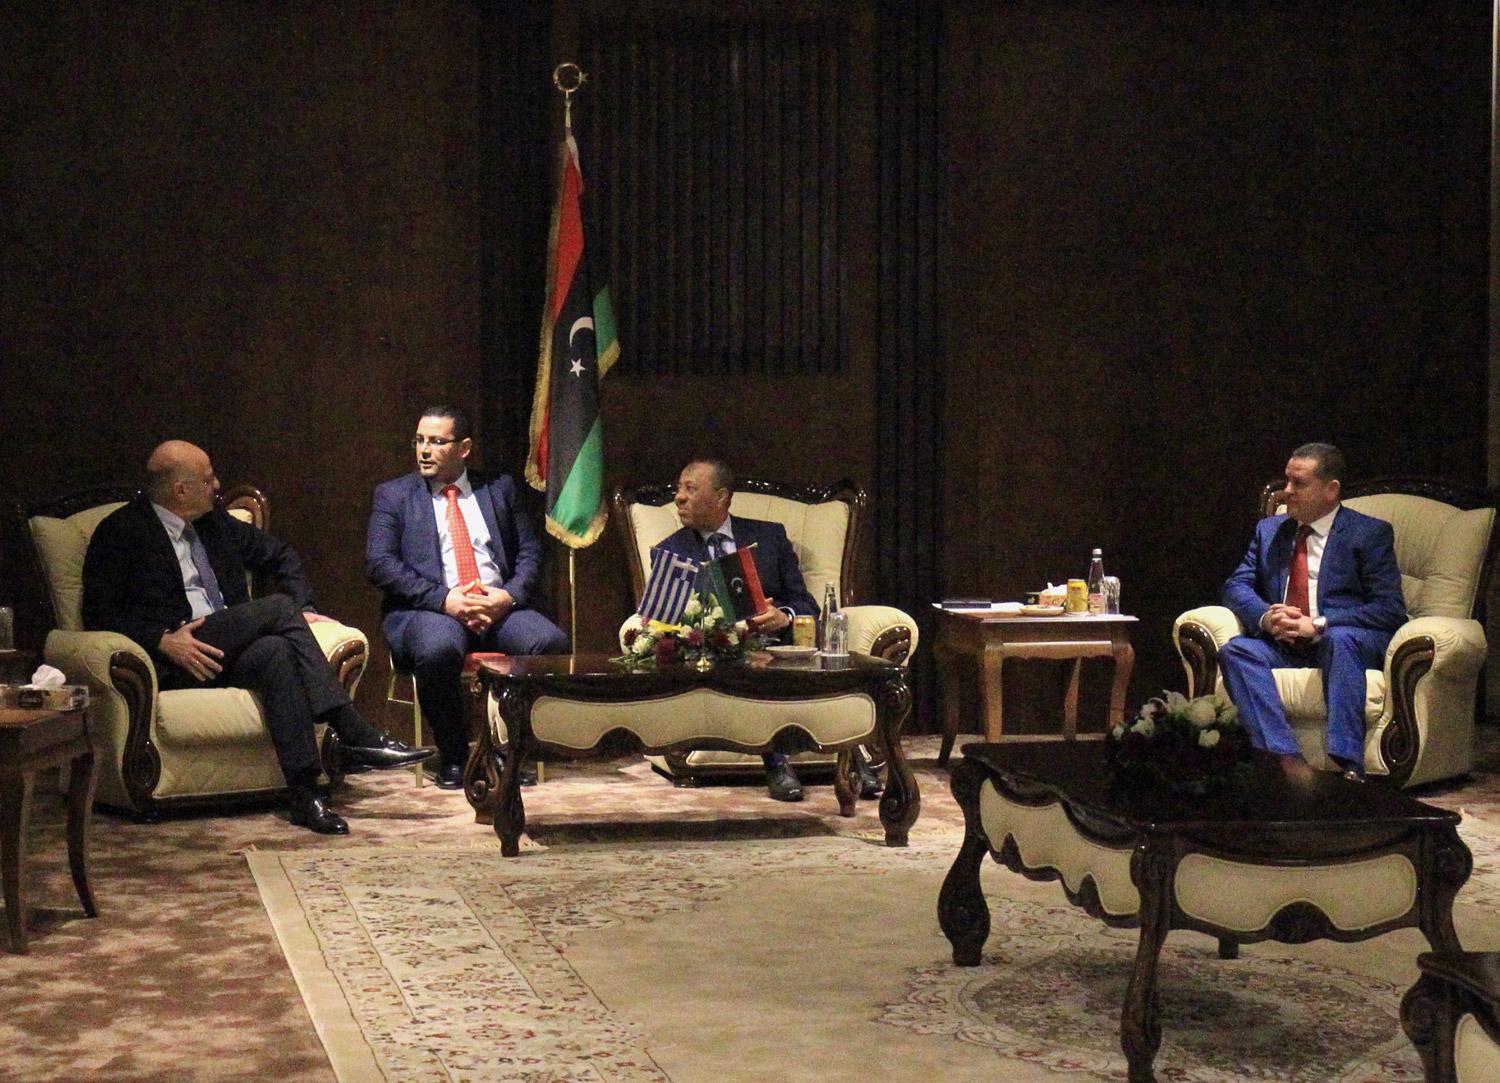 Libya is split between bitterly opposed administrations in the east and west.